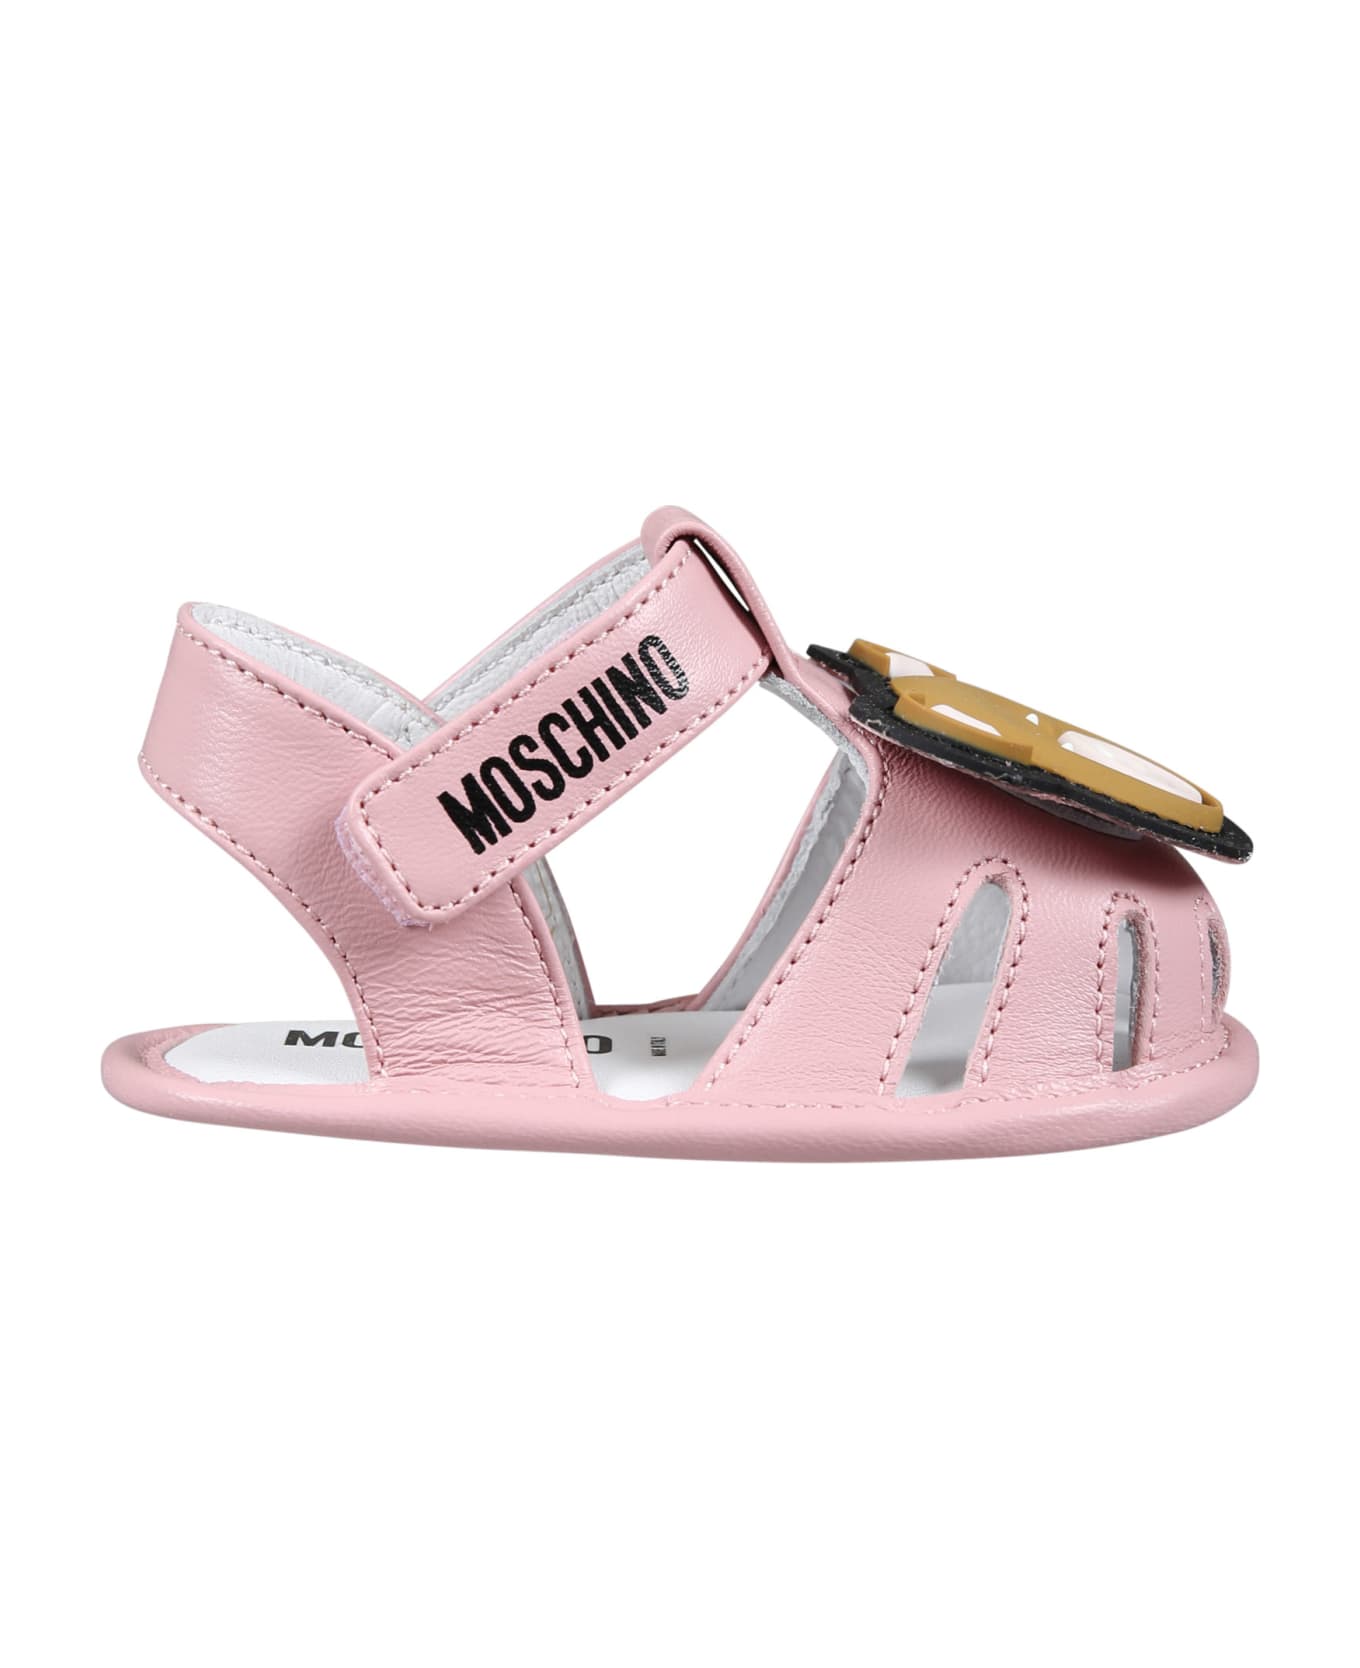 Moschino Pink Sandals For Baby Girl With Teddy Bear - Pink シューズ